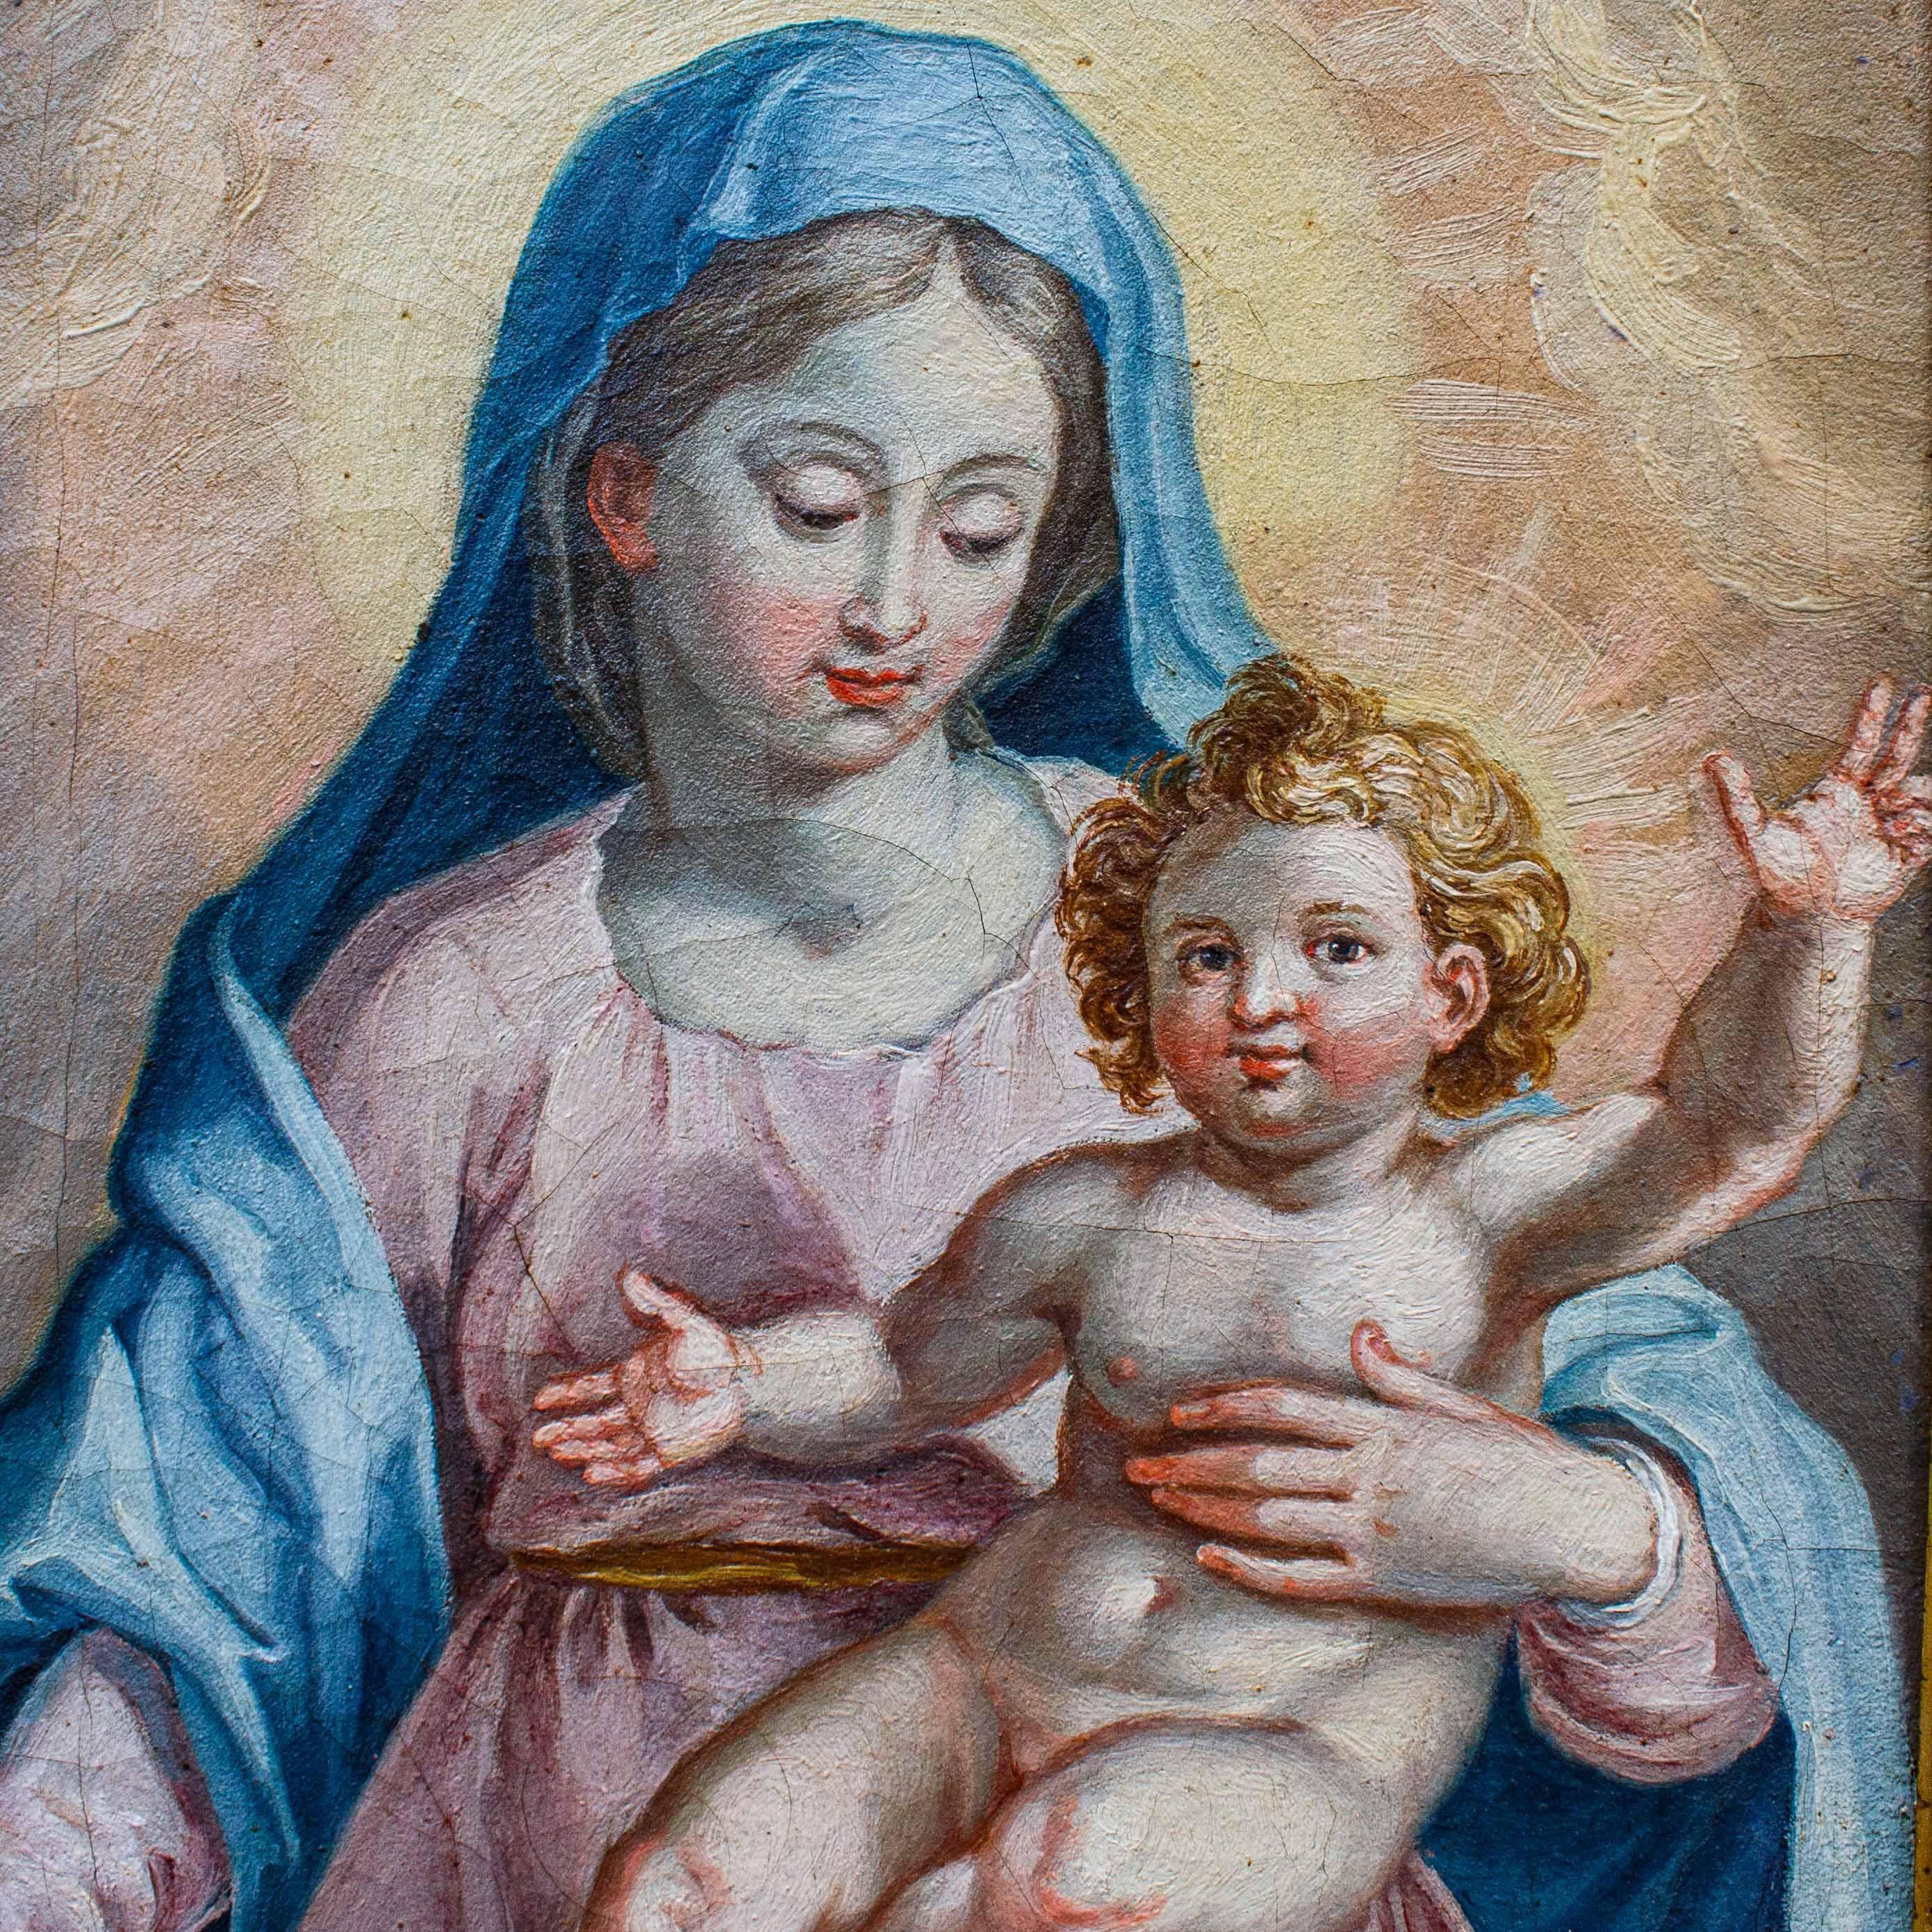 17th Century Madonna with Child Painting Oil on Canvas Tuscan School For Sale 1